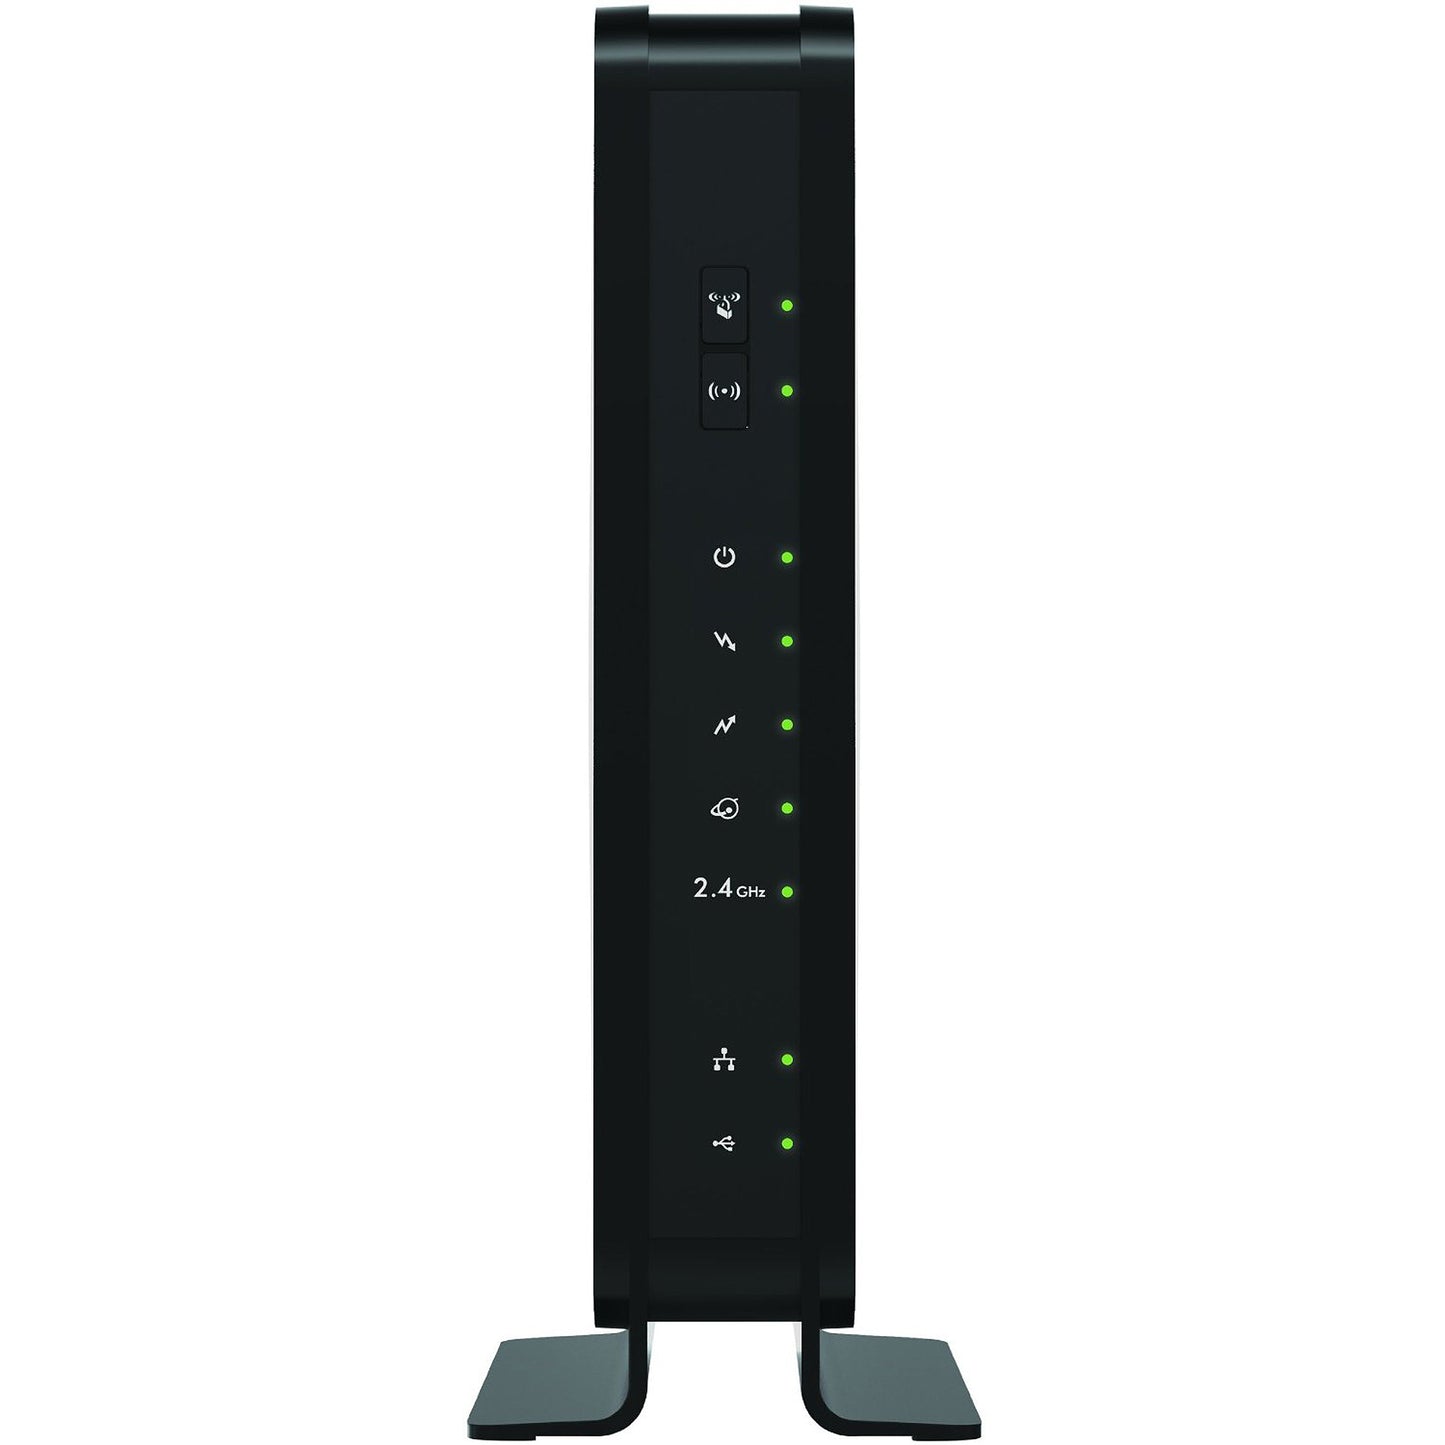 NETGEAR N300 (8x4) WiFi Cable Modem Router Combo C3000, DOCSIS 3.0 | Certified for Xfinity by Comcast, Spectrum, COX & more (C3000)